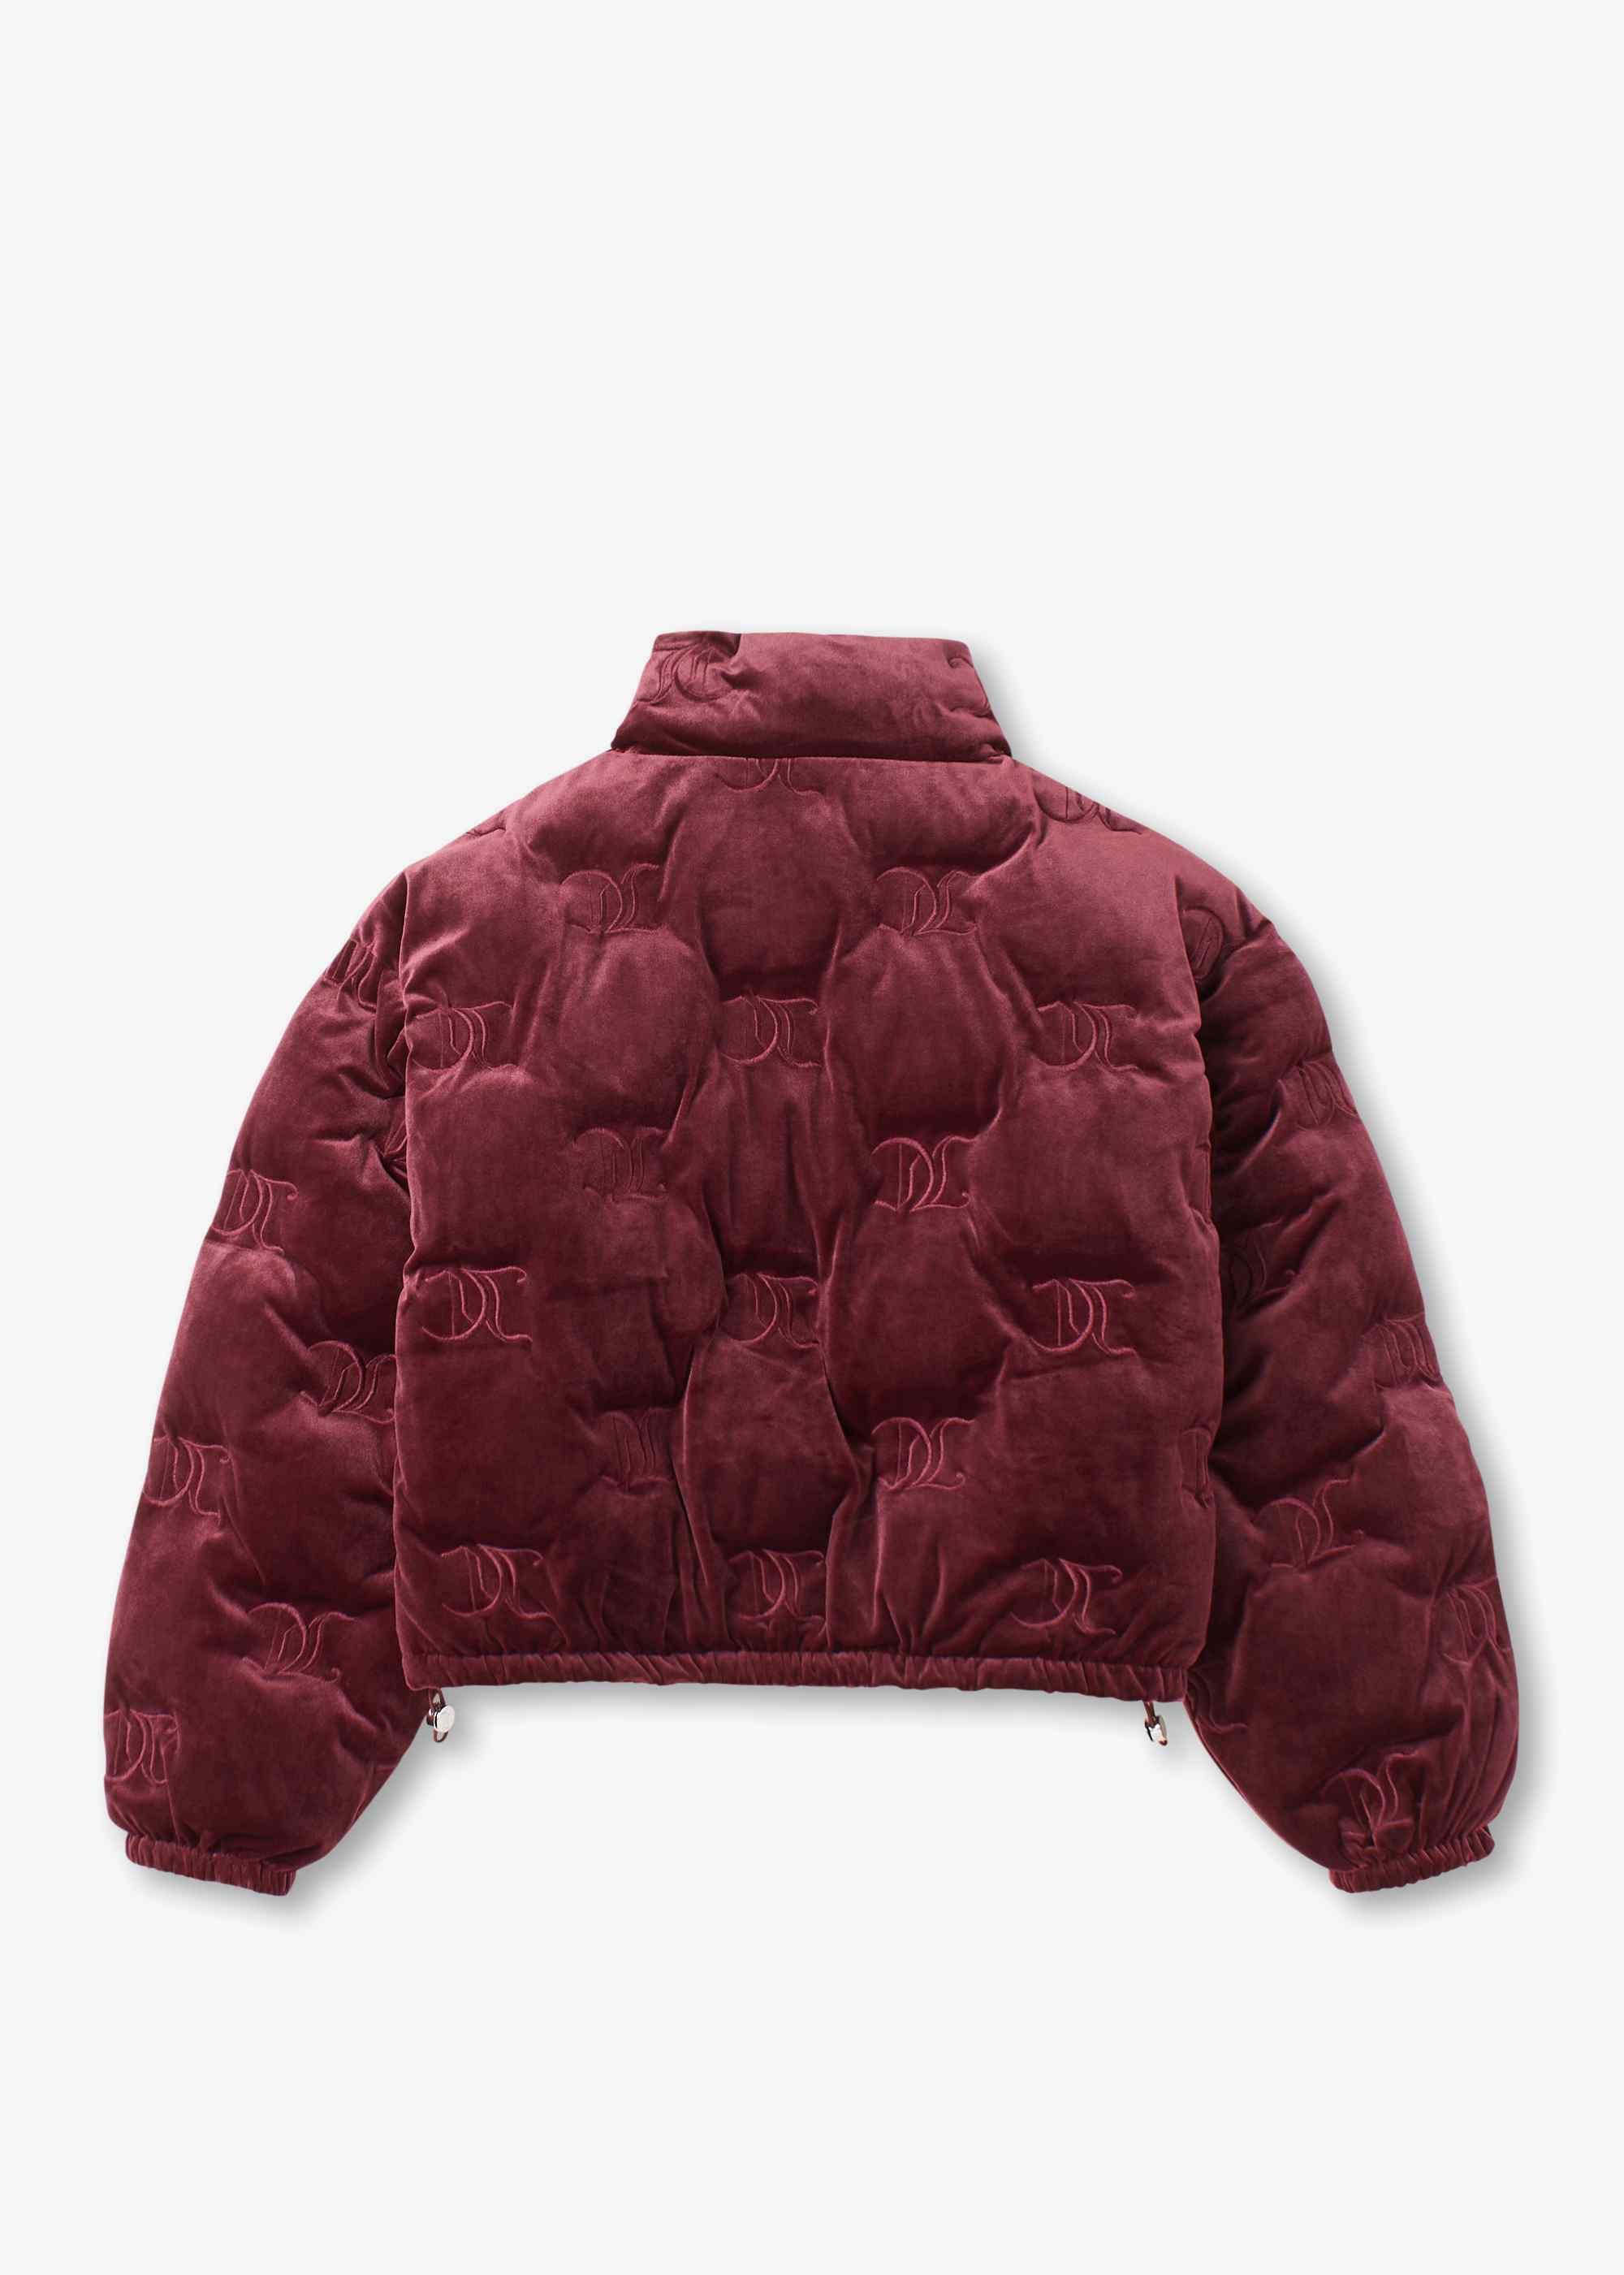 Juicy Couture S Madeline Monogram Velour Puffer Jacket in Red